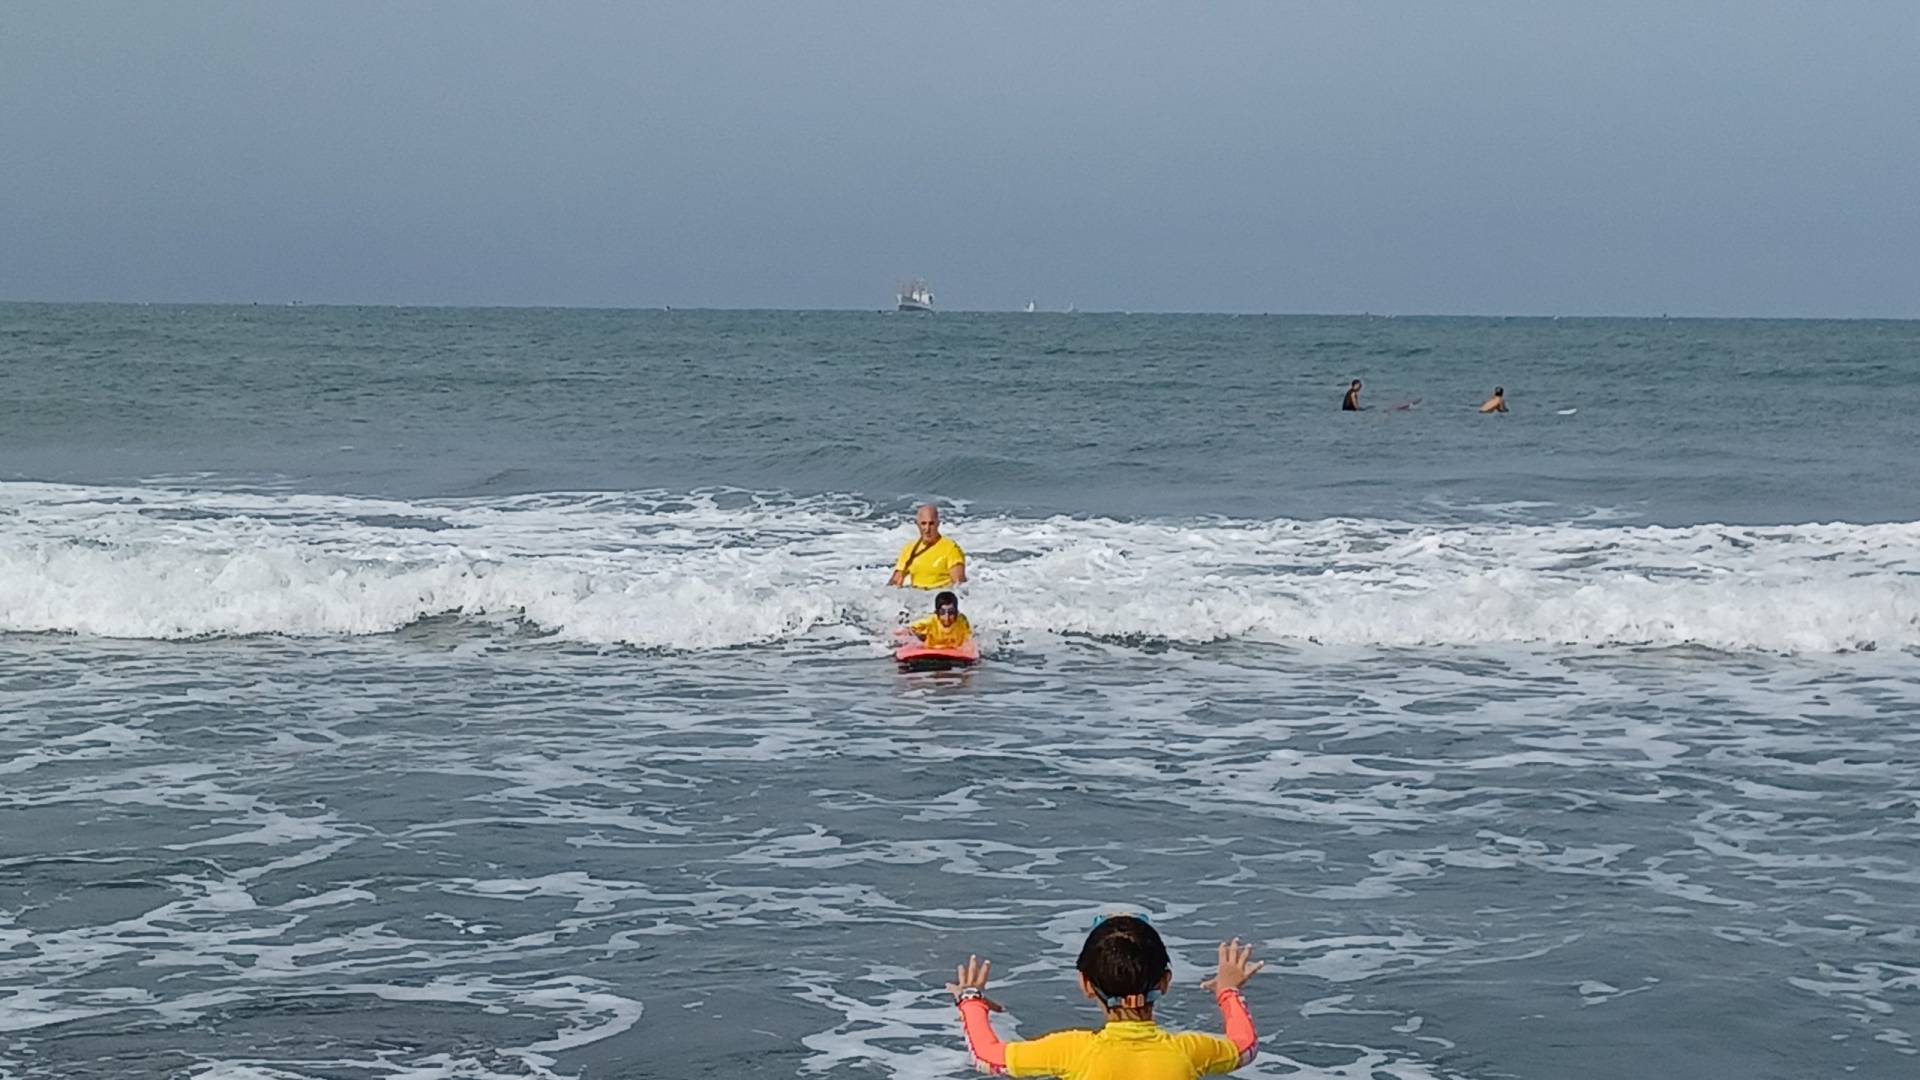 A child surfing in the prone position. Coach in the background. Child in the foreground